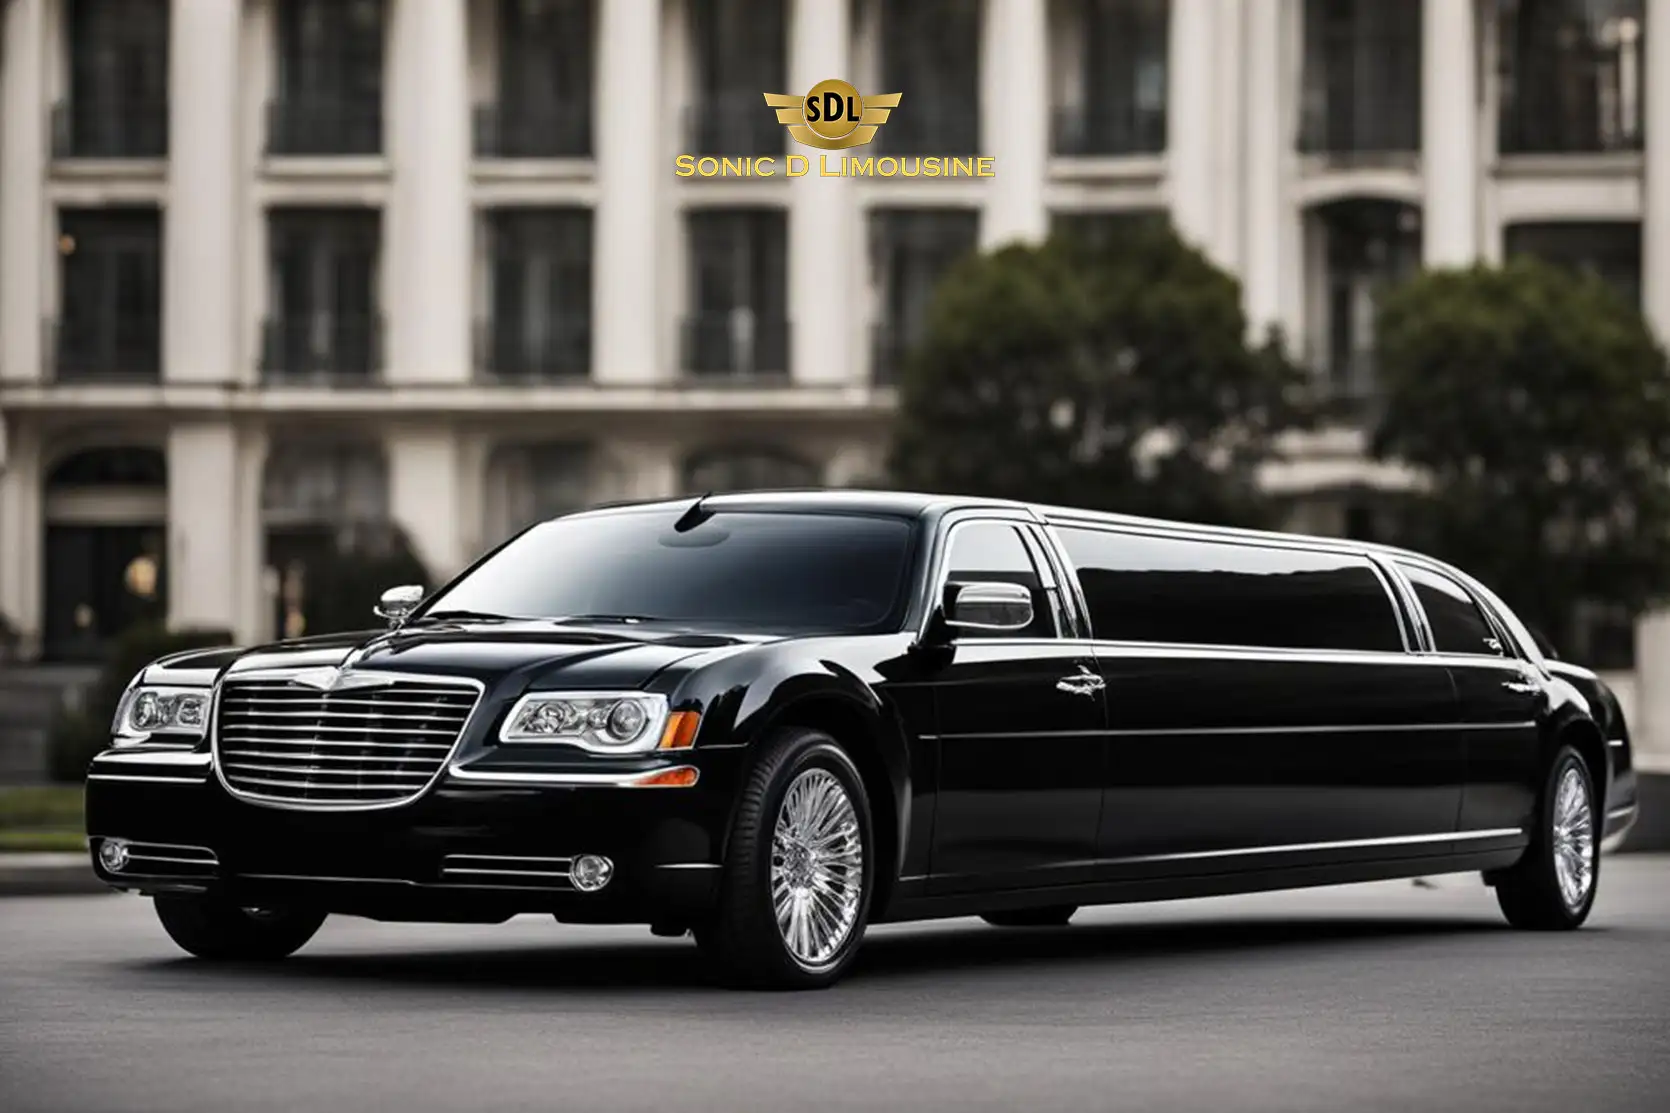 Sonic D Limo Service: Experience 100% Premium Limousine Service in NYC ...